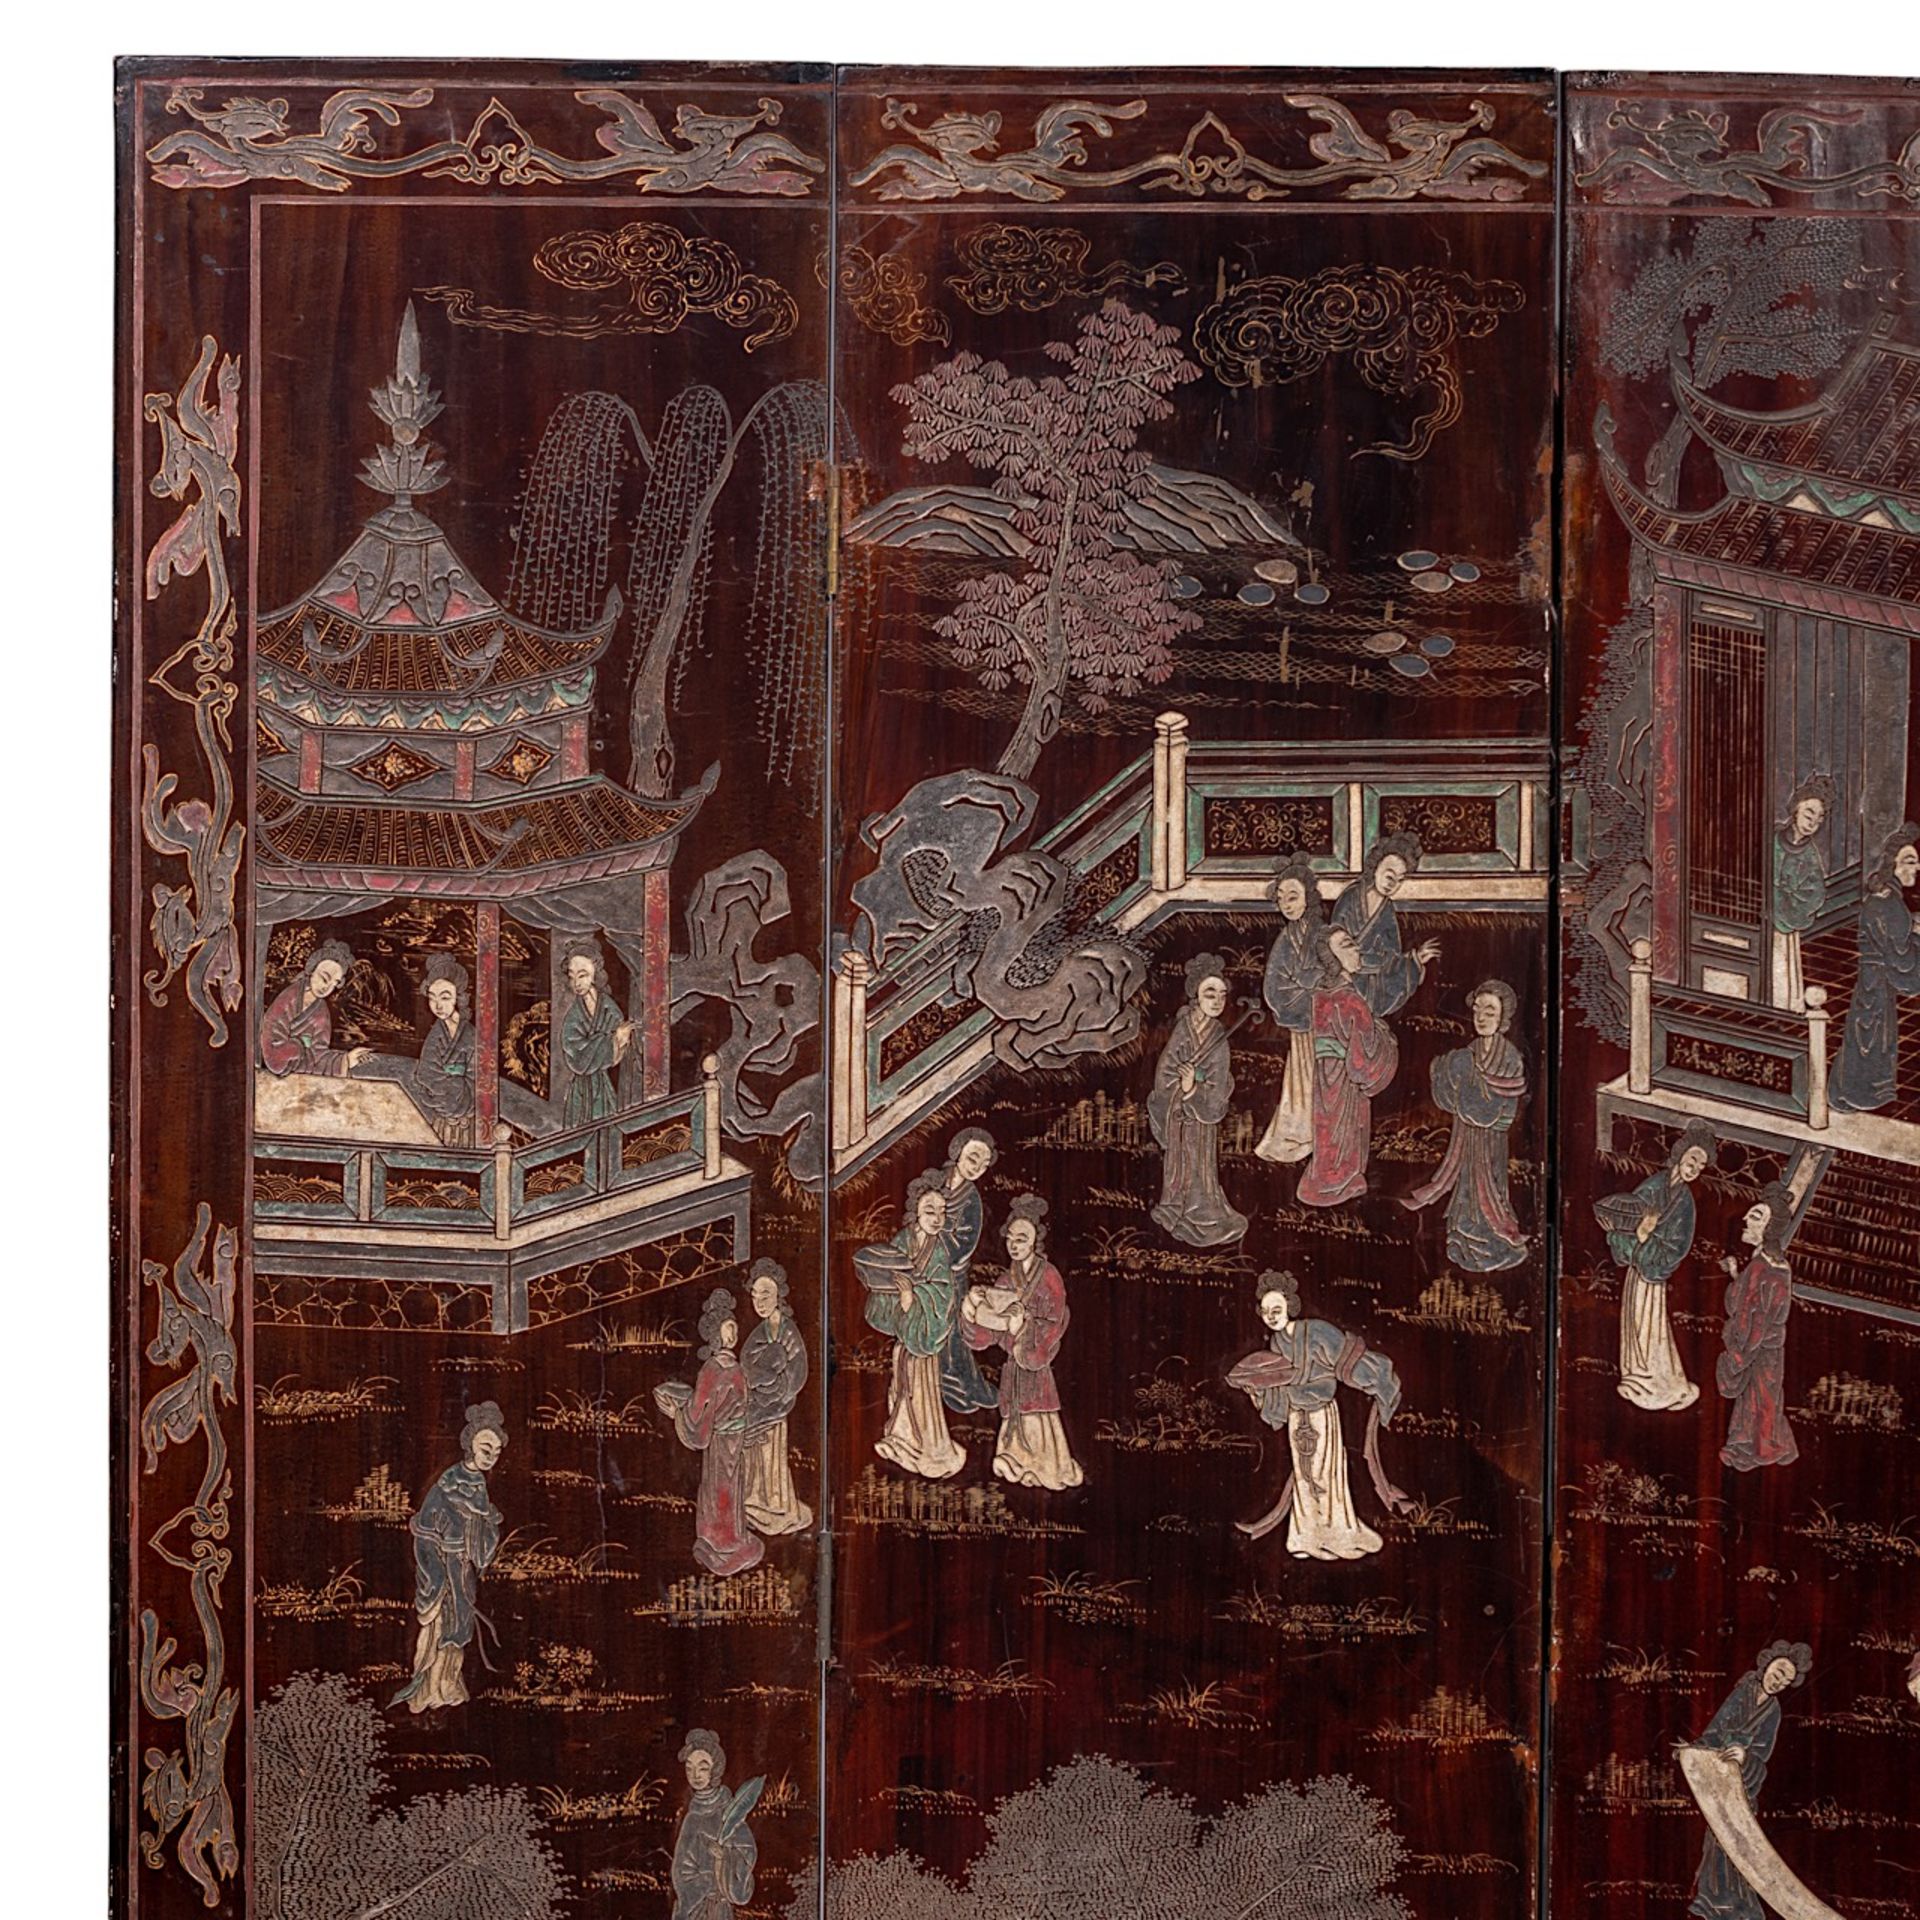 A Chinese coromandel lacquered four-panel chamber screen, late 18thC/19thC, H 162 - W 35,5 (each pan - Image 5 of 10